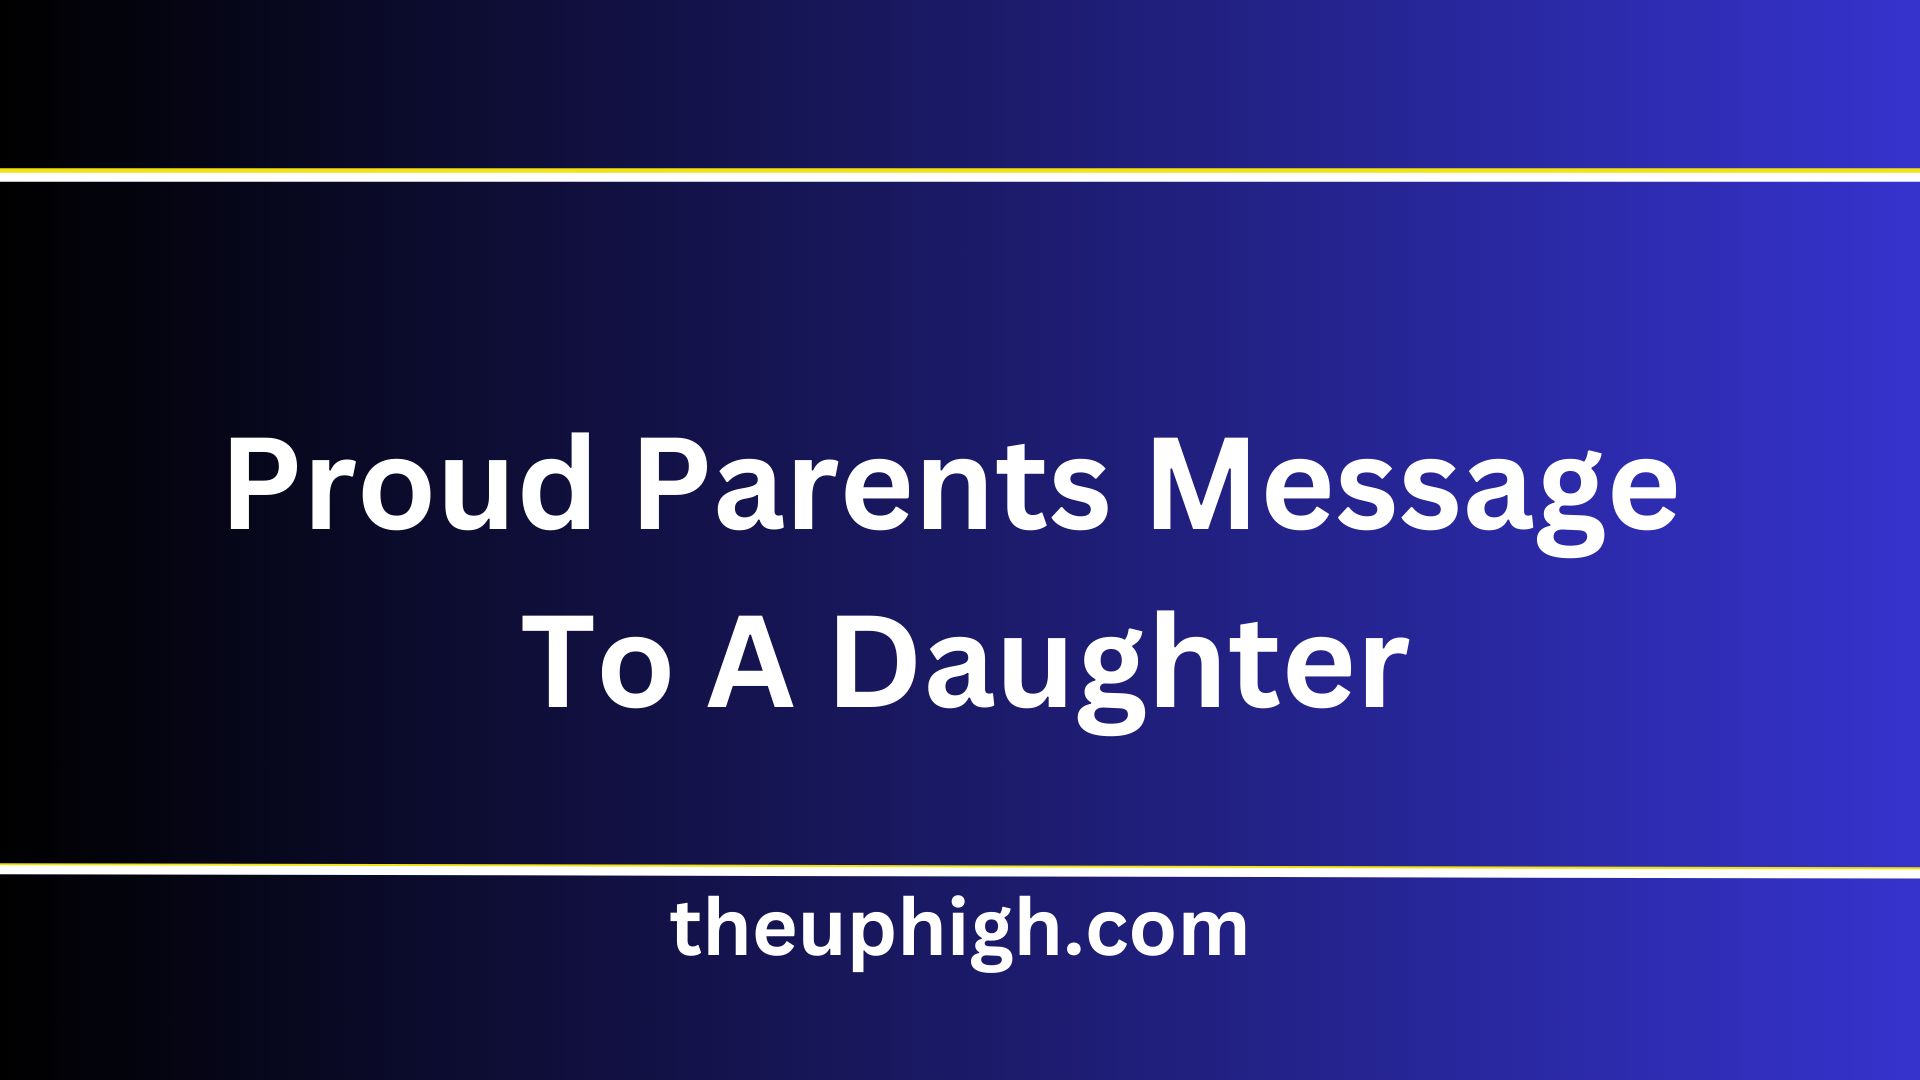 Proud Parents Message To A Daughter